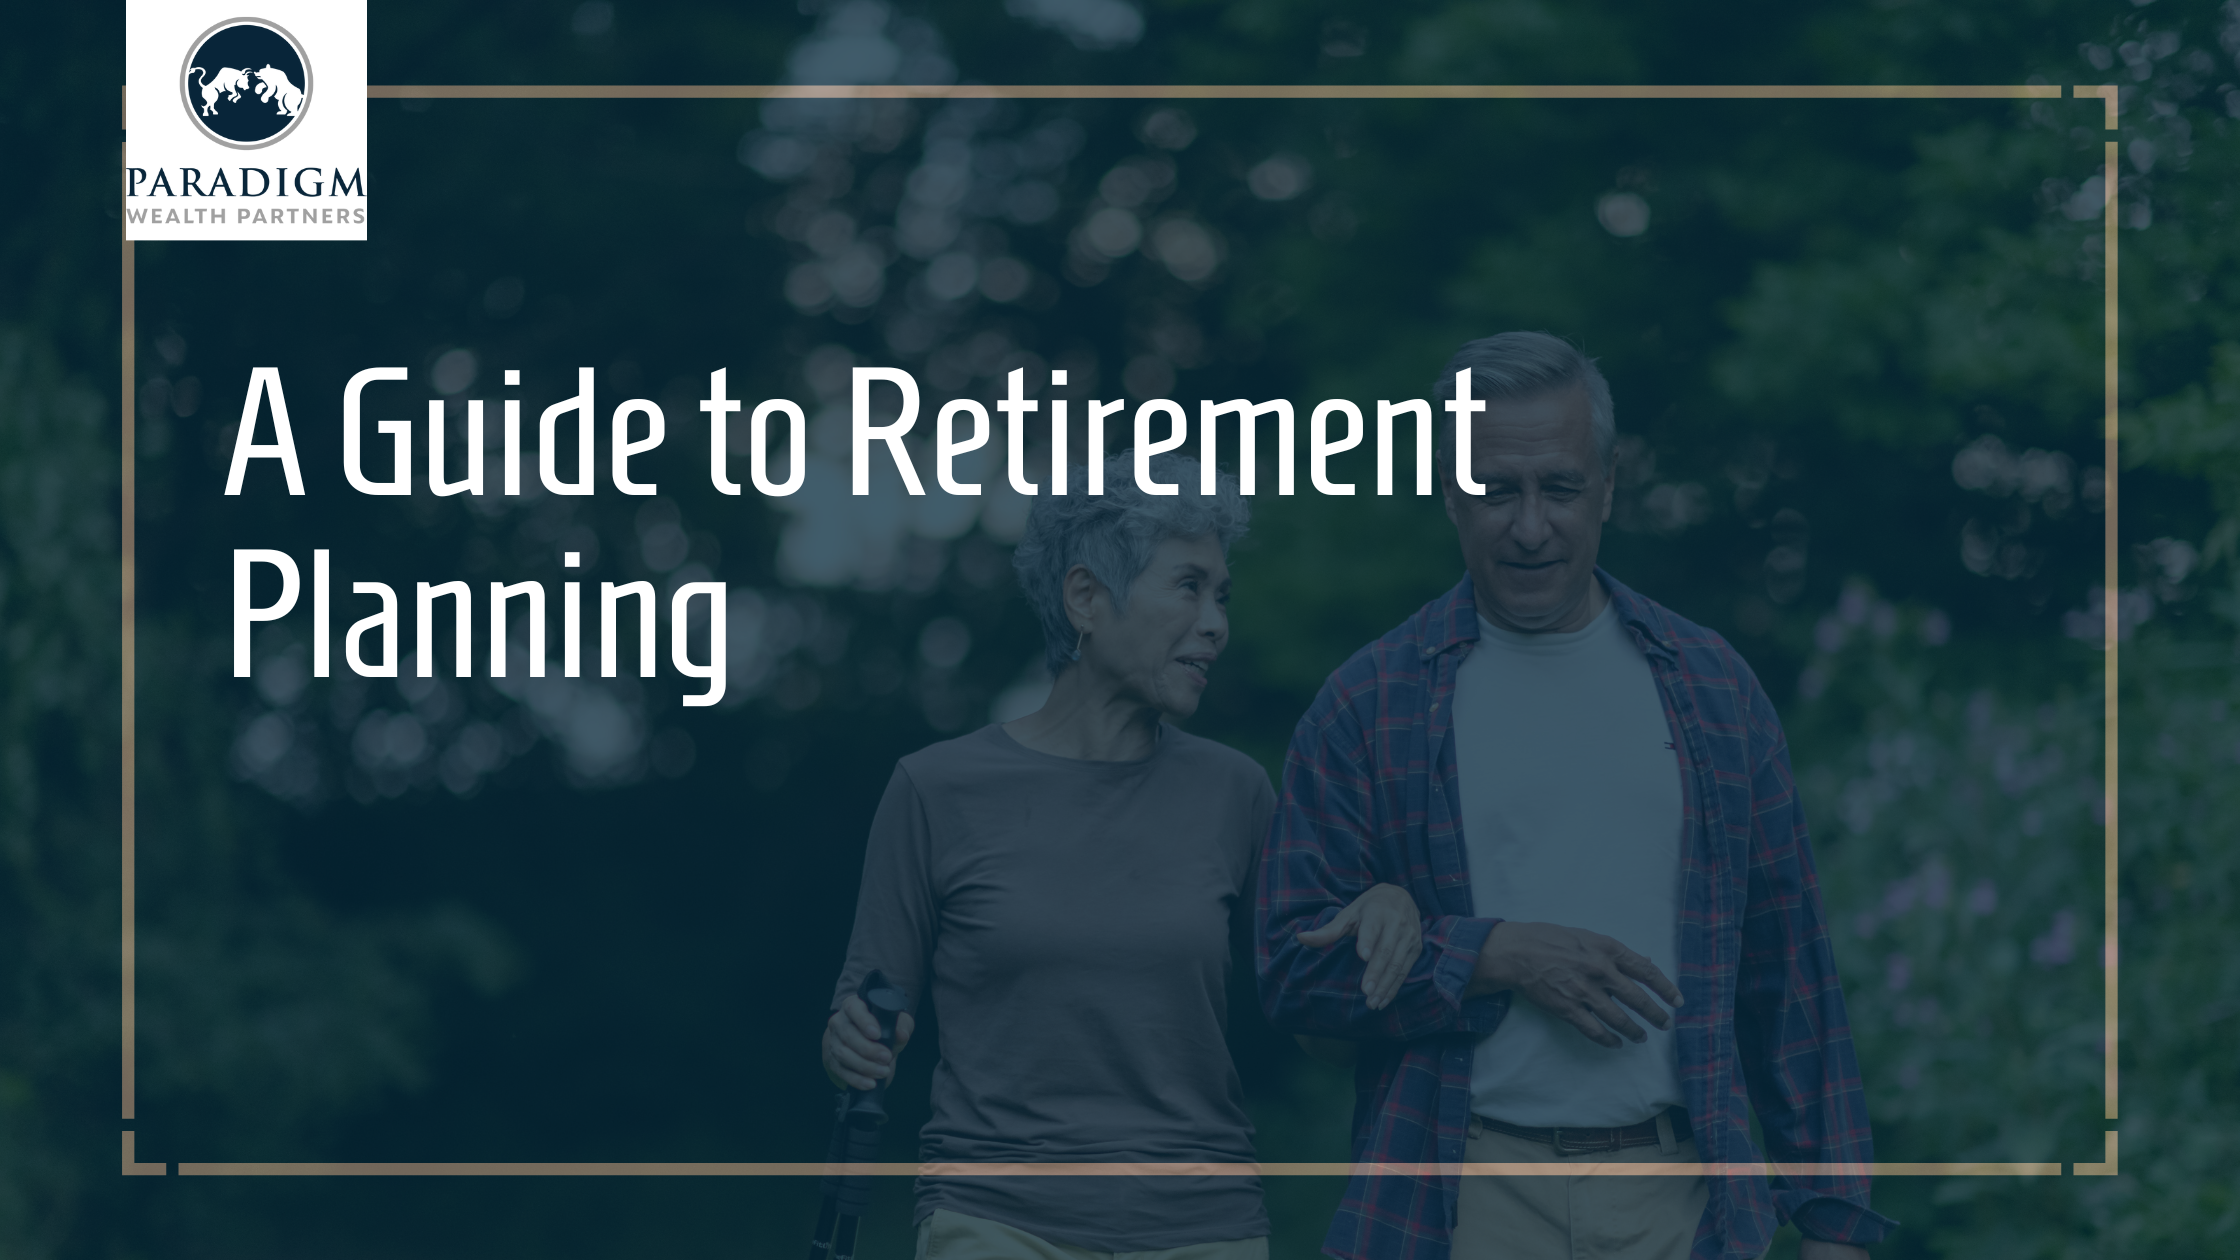 Guide to Retirement